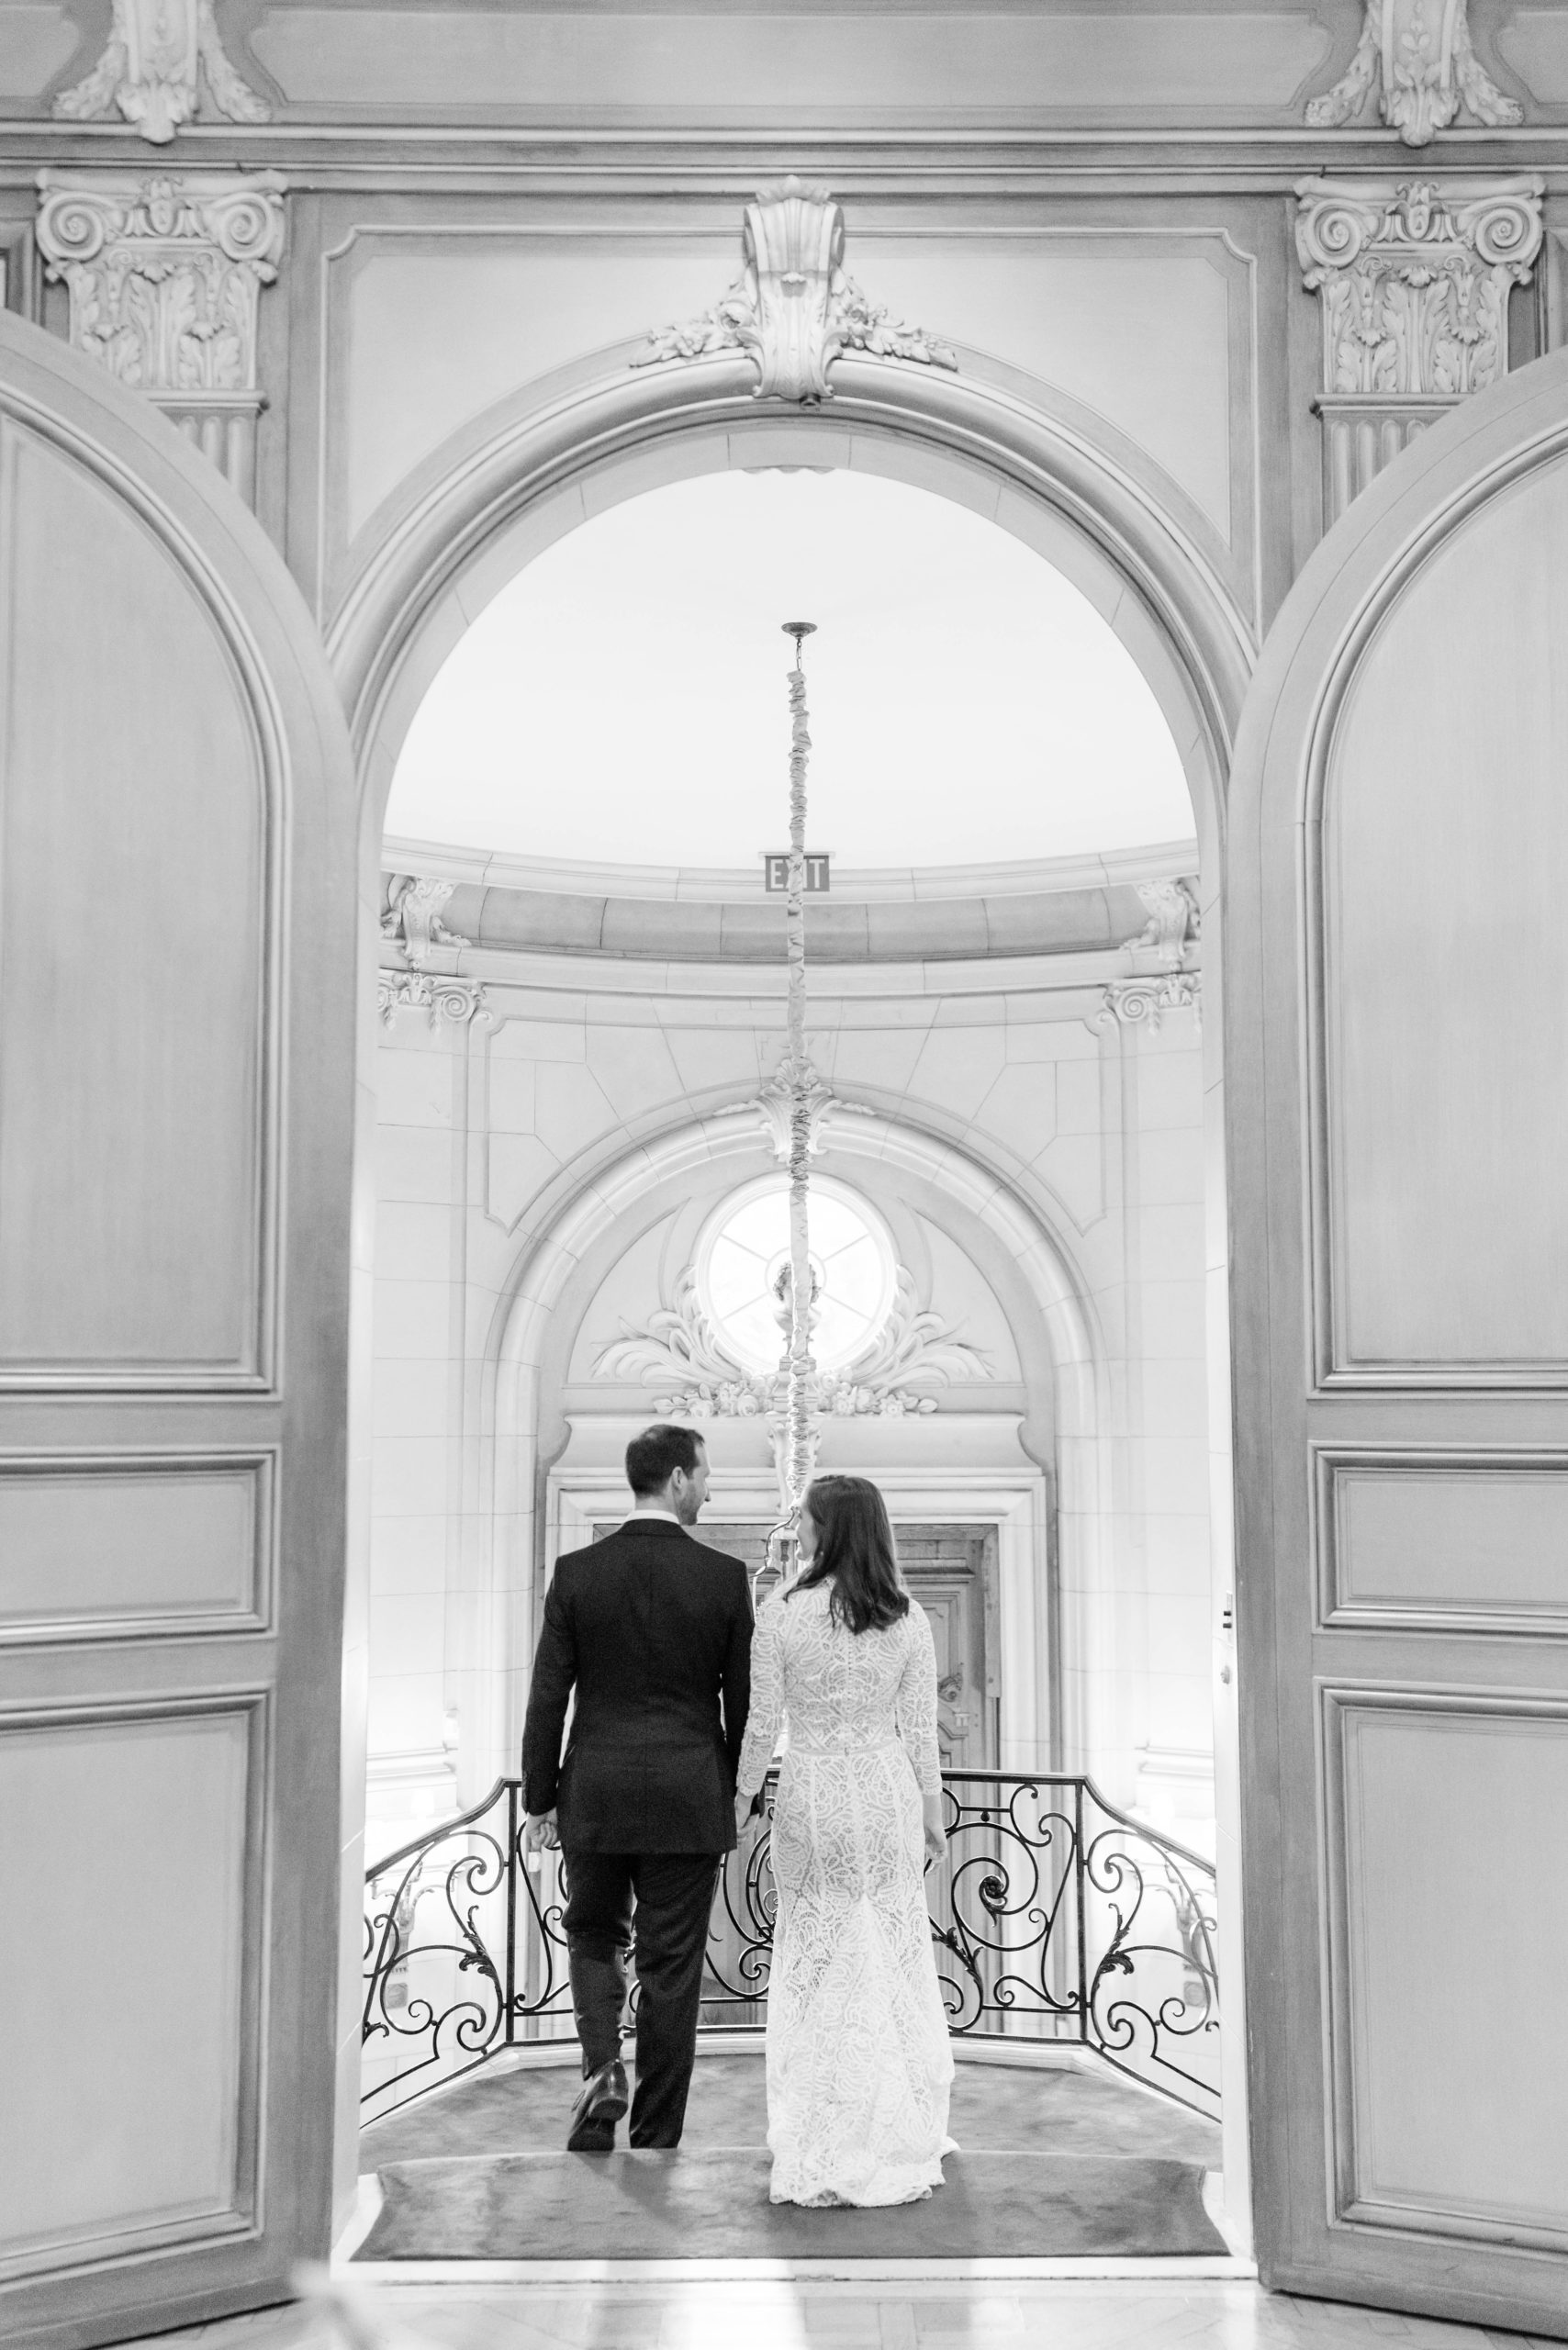 A stunning fall Meridian House wedding in Washington, DC captured by film photographer, Alicia Lacey.